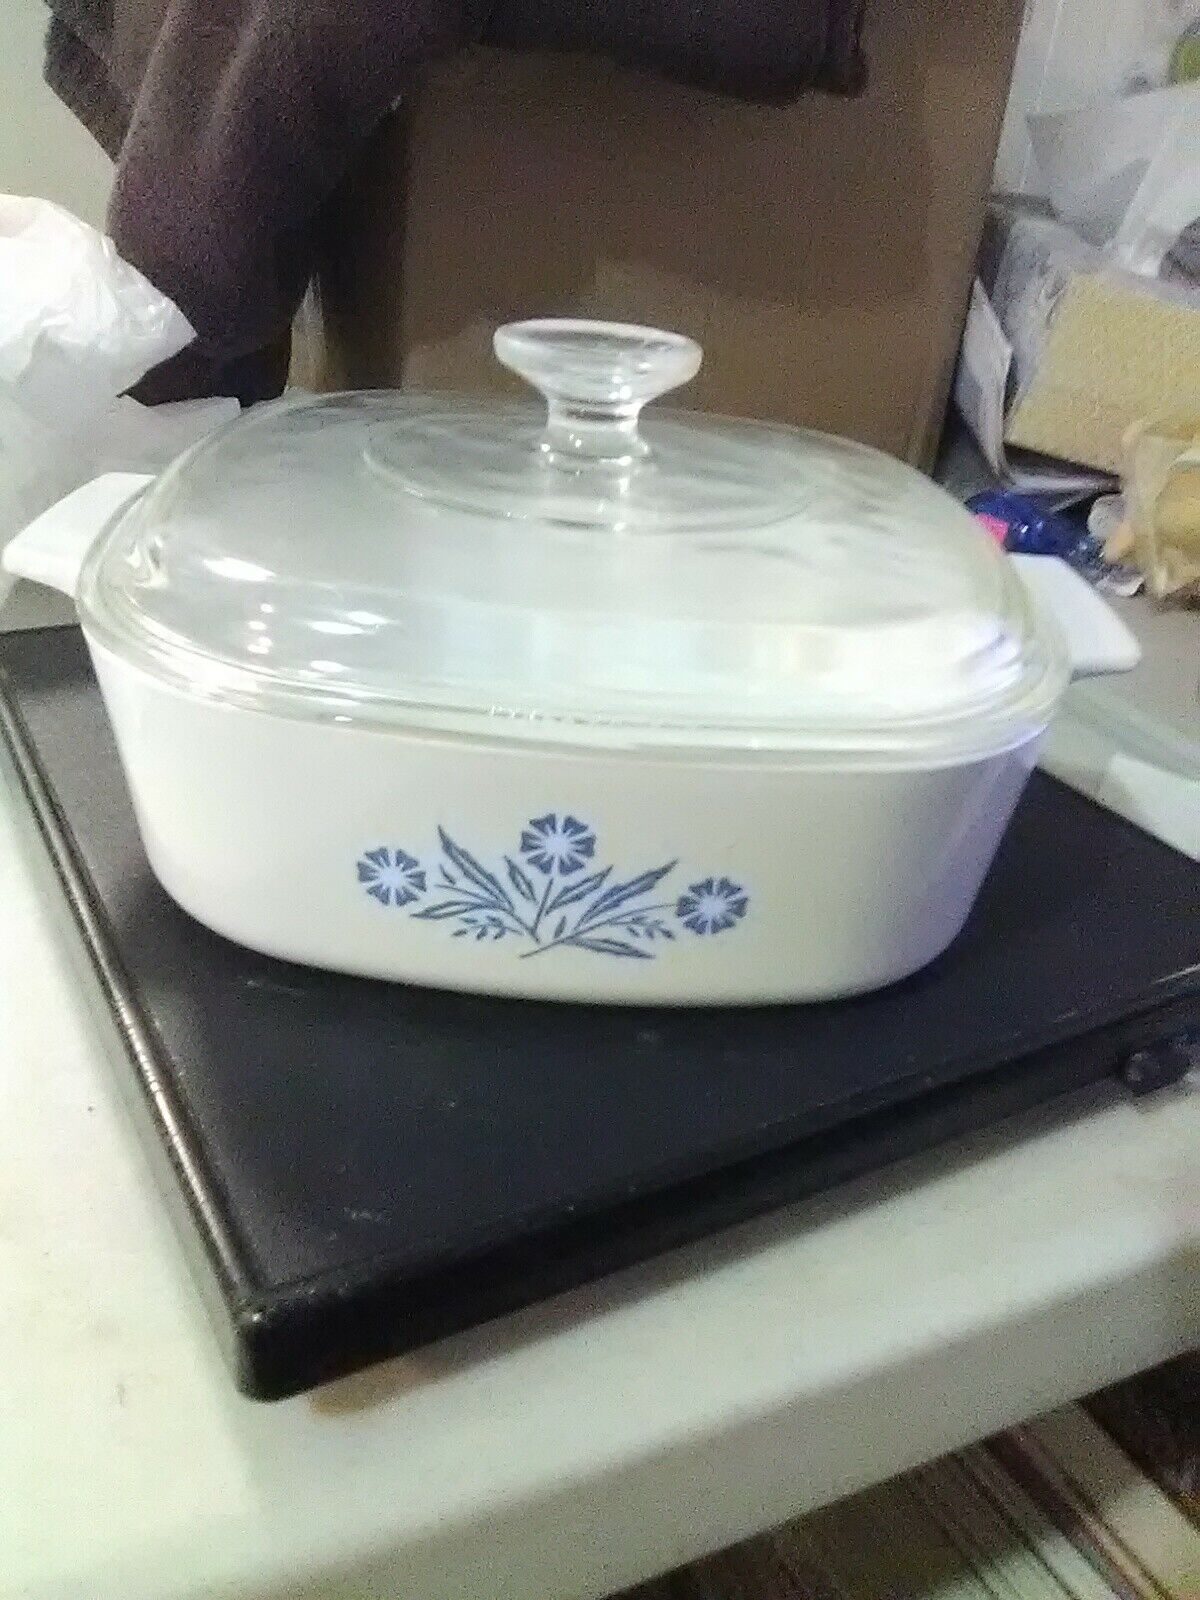 Primary image for Corning Glass Ware Cornflower Covered Casserole - 8 1/4" x 8 1/4"